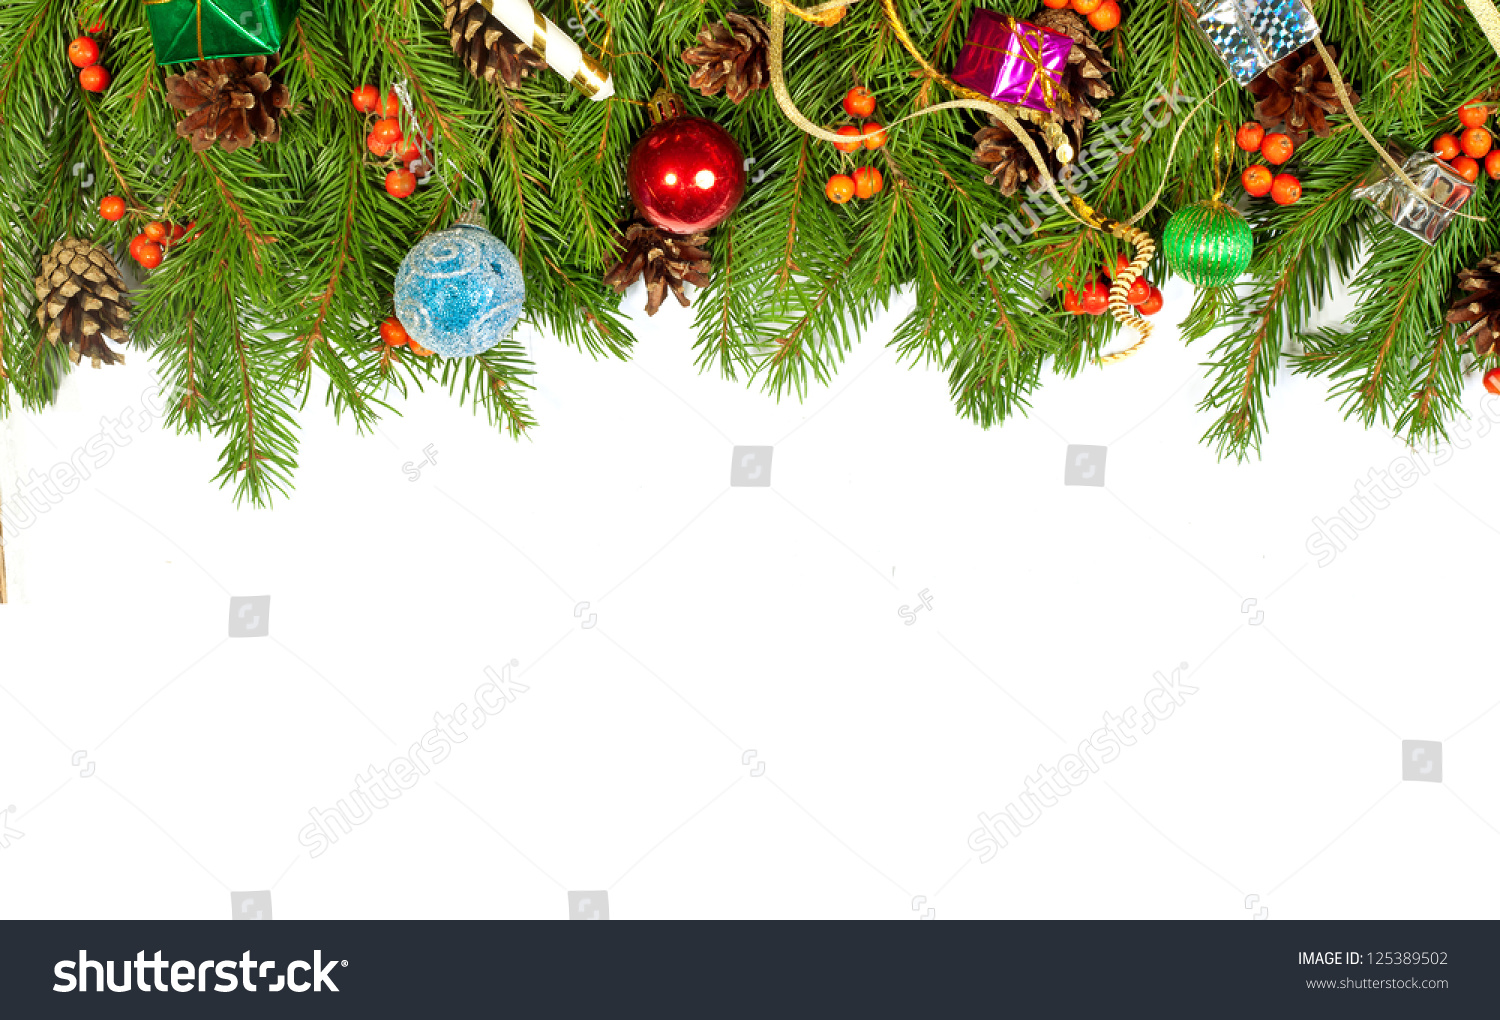 Christmas background with balls and decorations isolated on white background #125389502